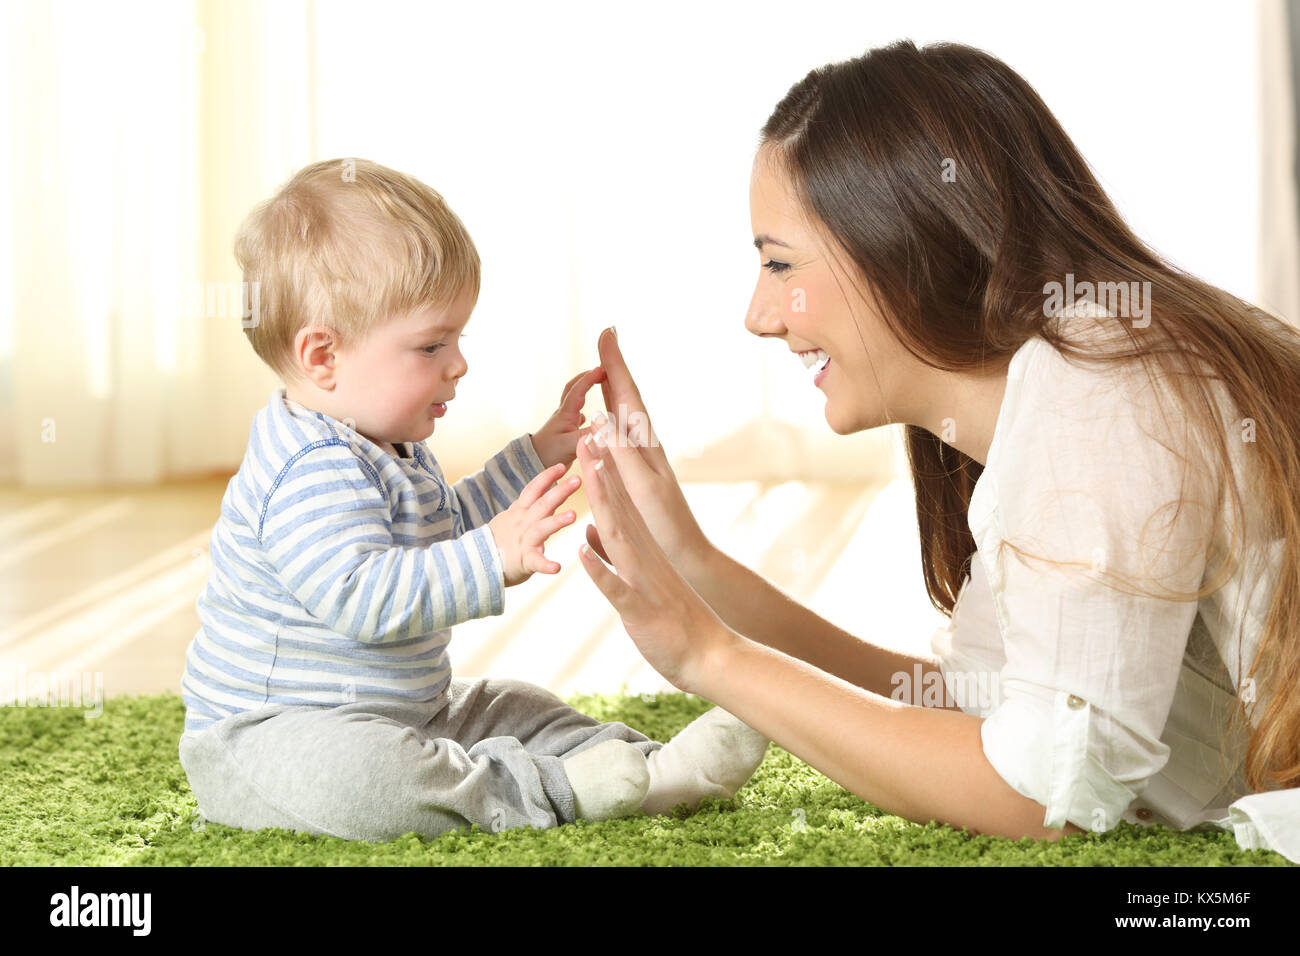 Side view portrait of a happy mother playing with her baby touching hands on a carpet at home Stock Photo